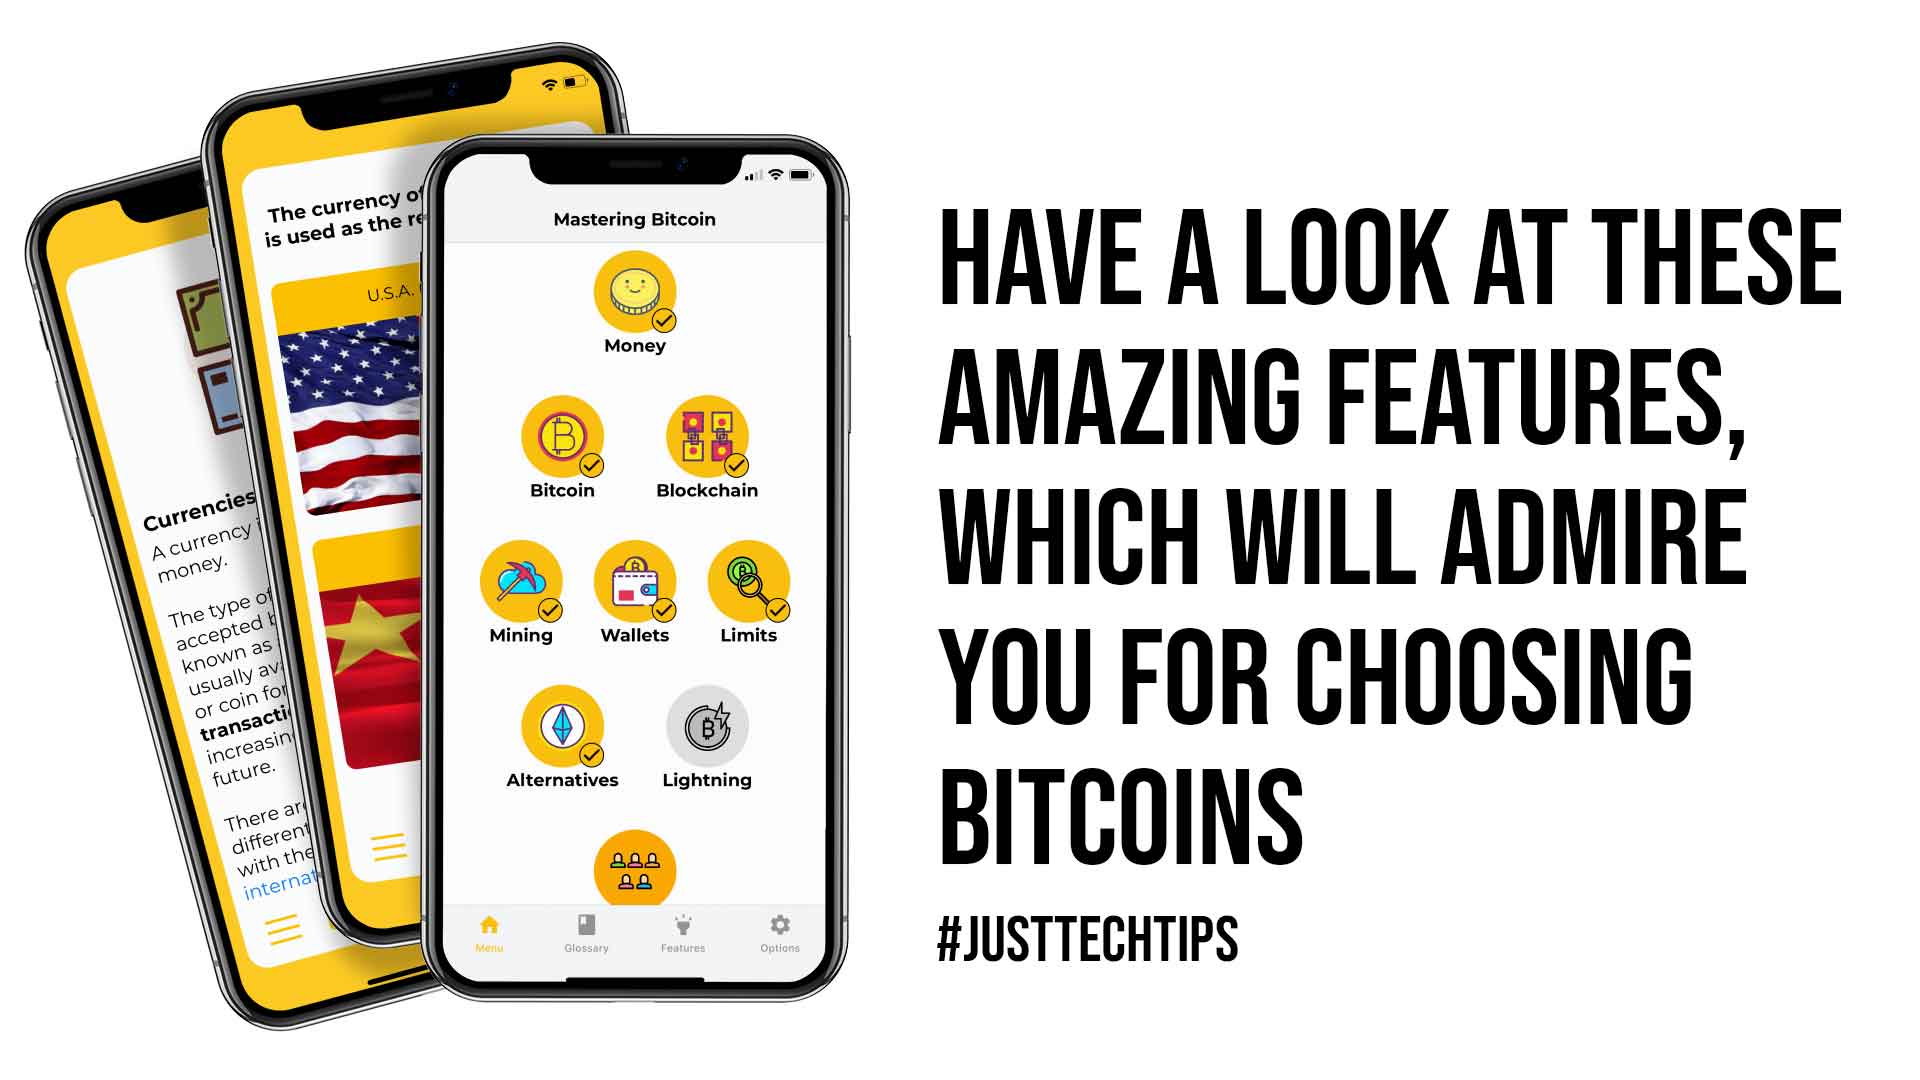 Have a Look at These Amazing Features Which Will Admire You for Choosing Bitcoins